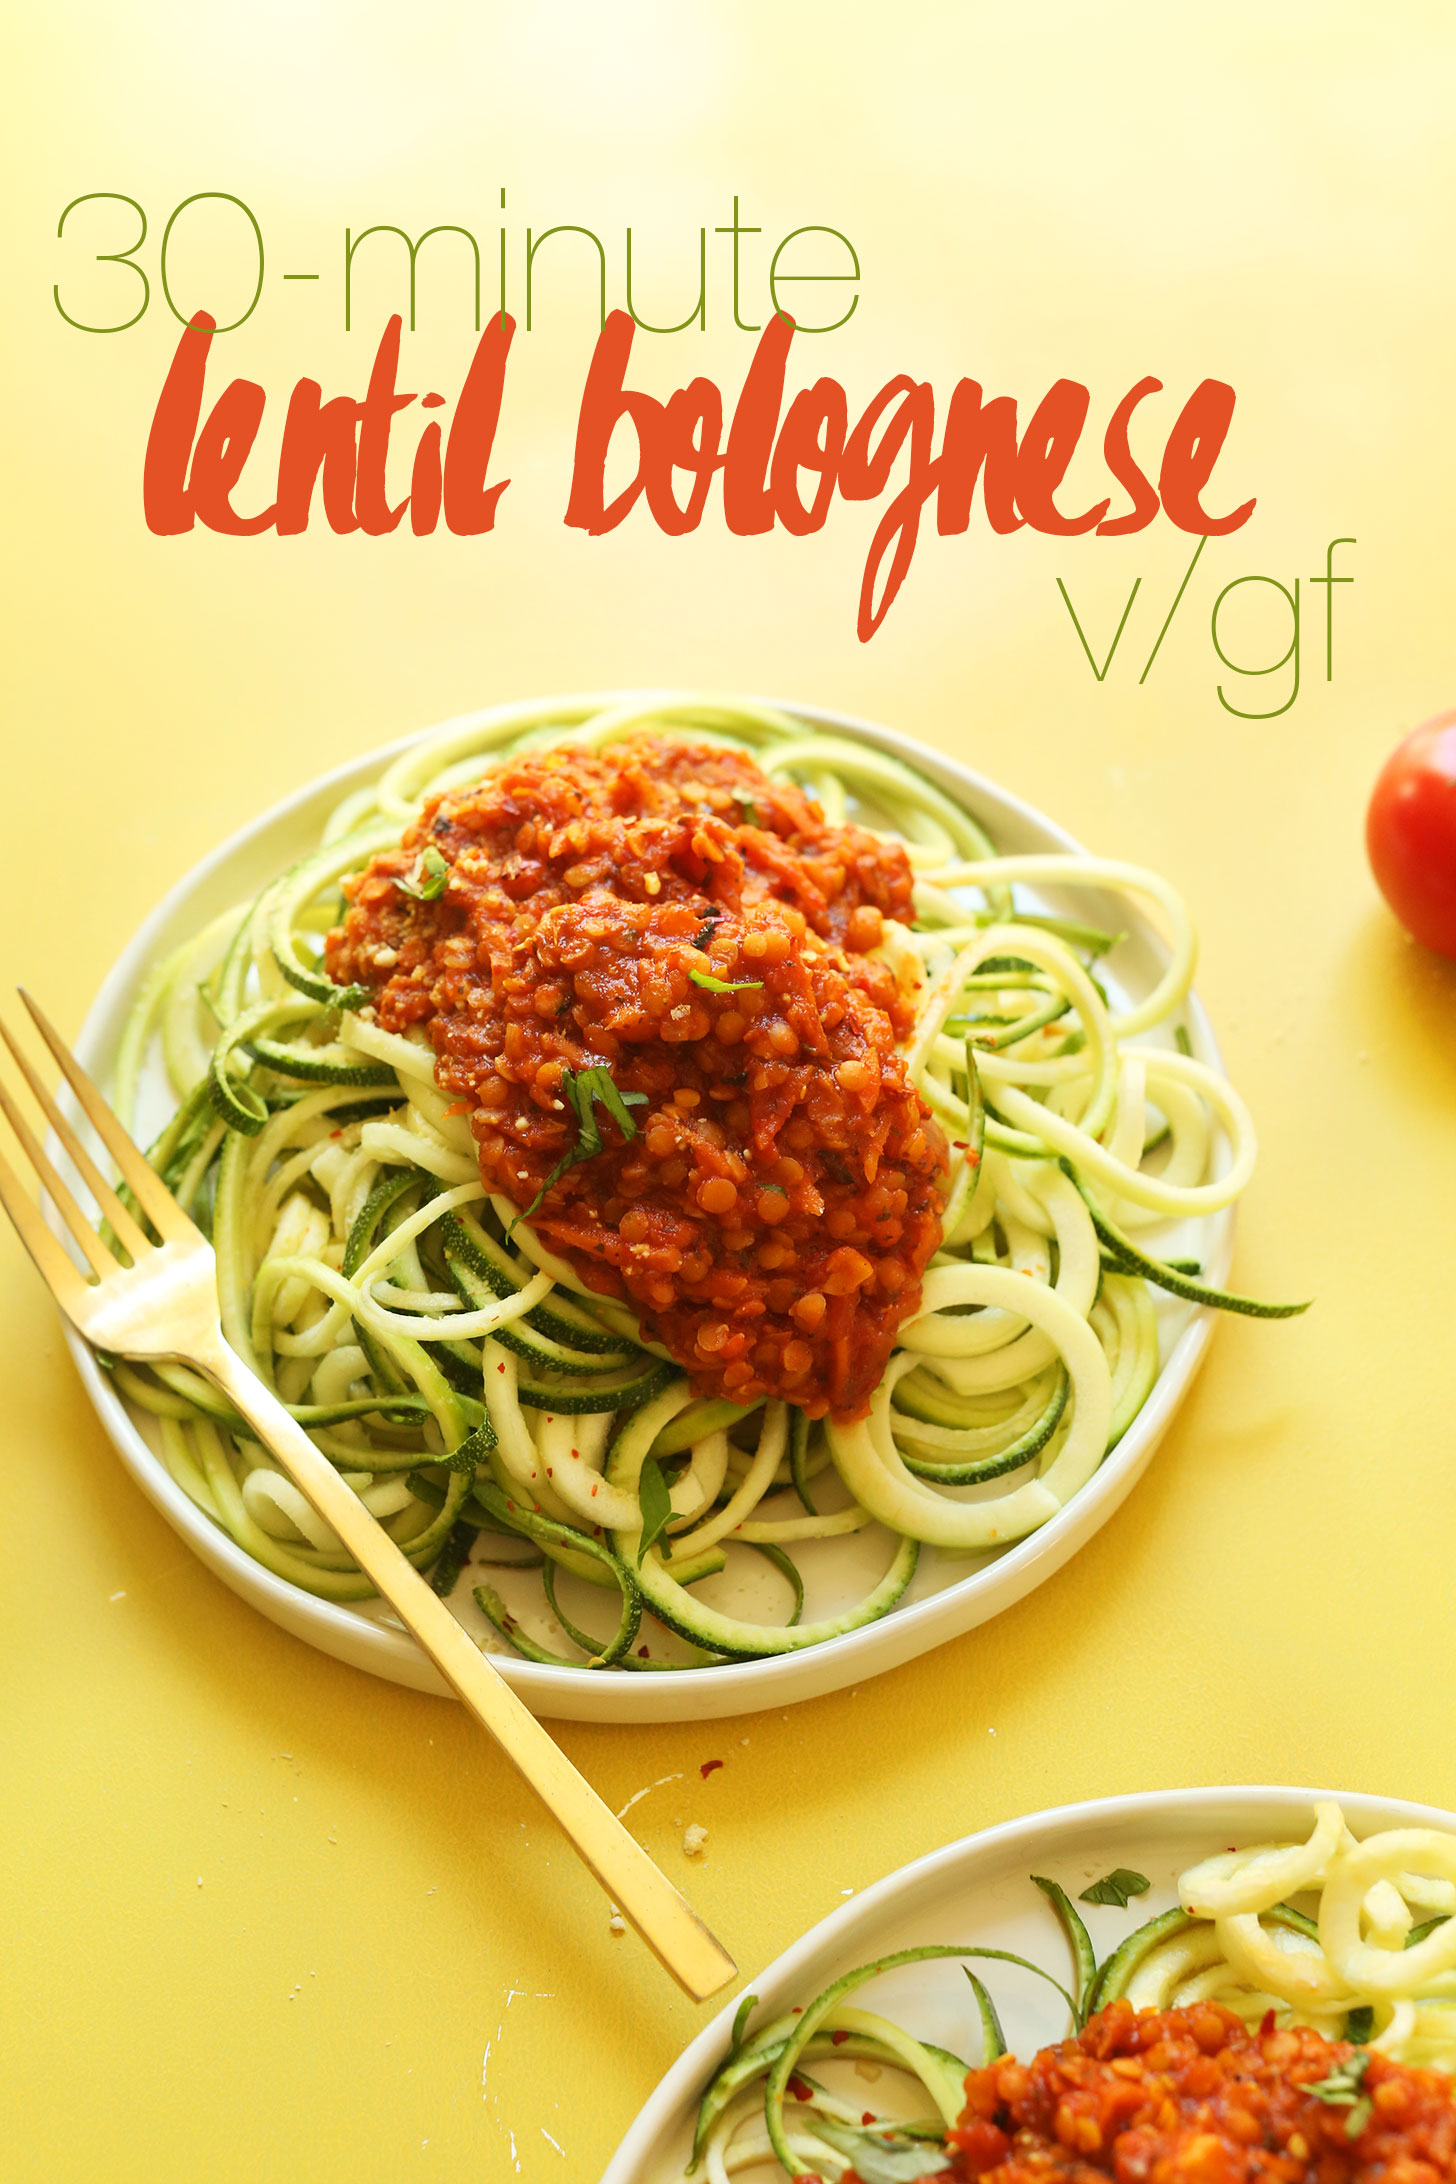 Spiralized-zucchini-pasta-with-vegan-lentil-red-sauce-30-minutes-so-hearty-and-healthy-vegan-glutenfree-pasta-zoodles-recipe